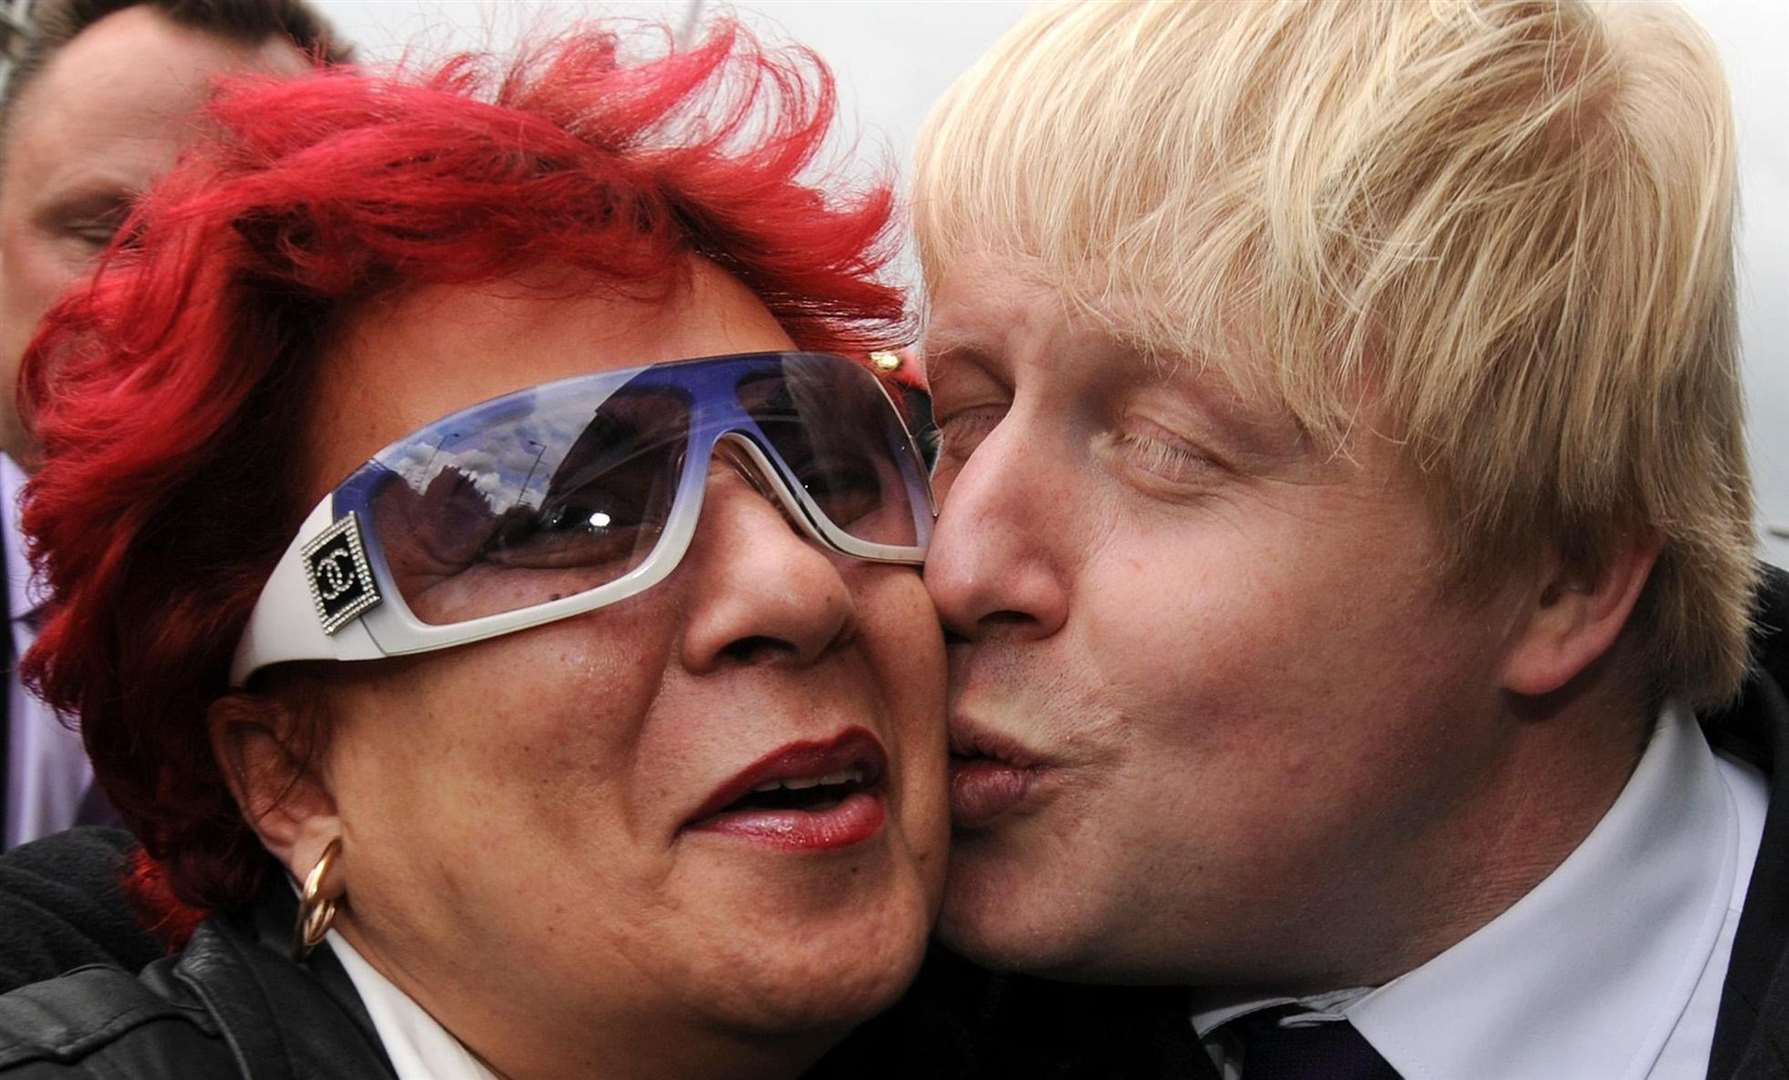 Responding to a request for a kiss from Gina Andrade in Wembley during his mayoral campaign in 2008 (Fiona Hanson/PA)